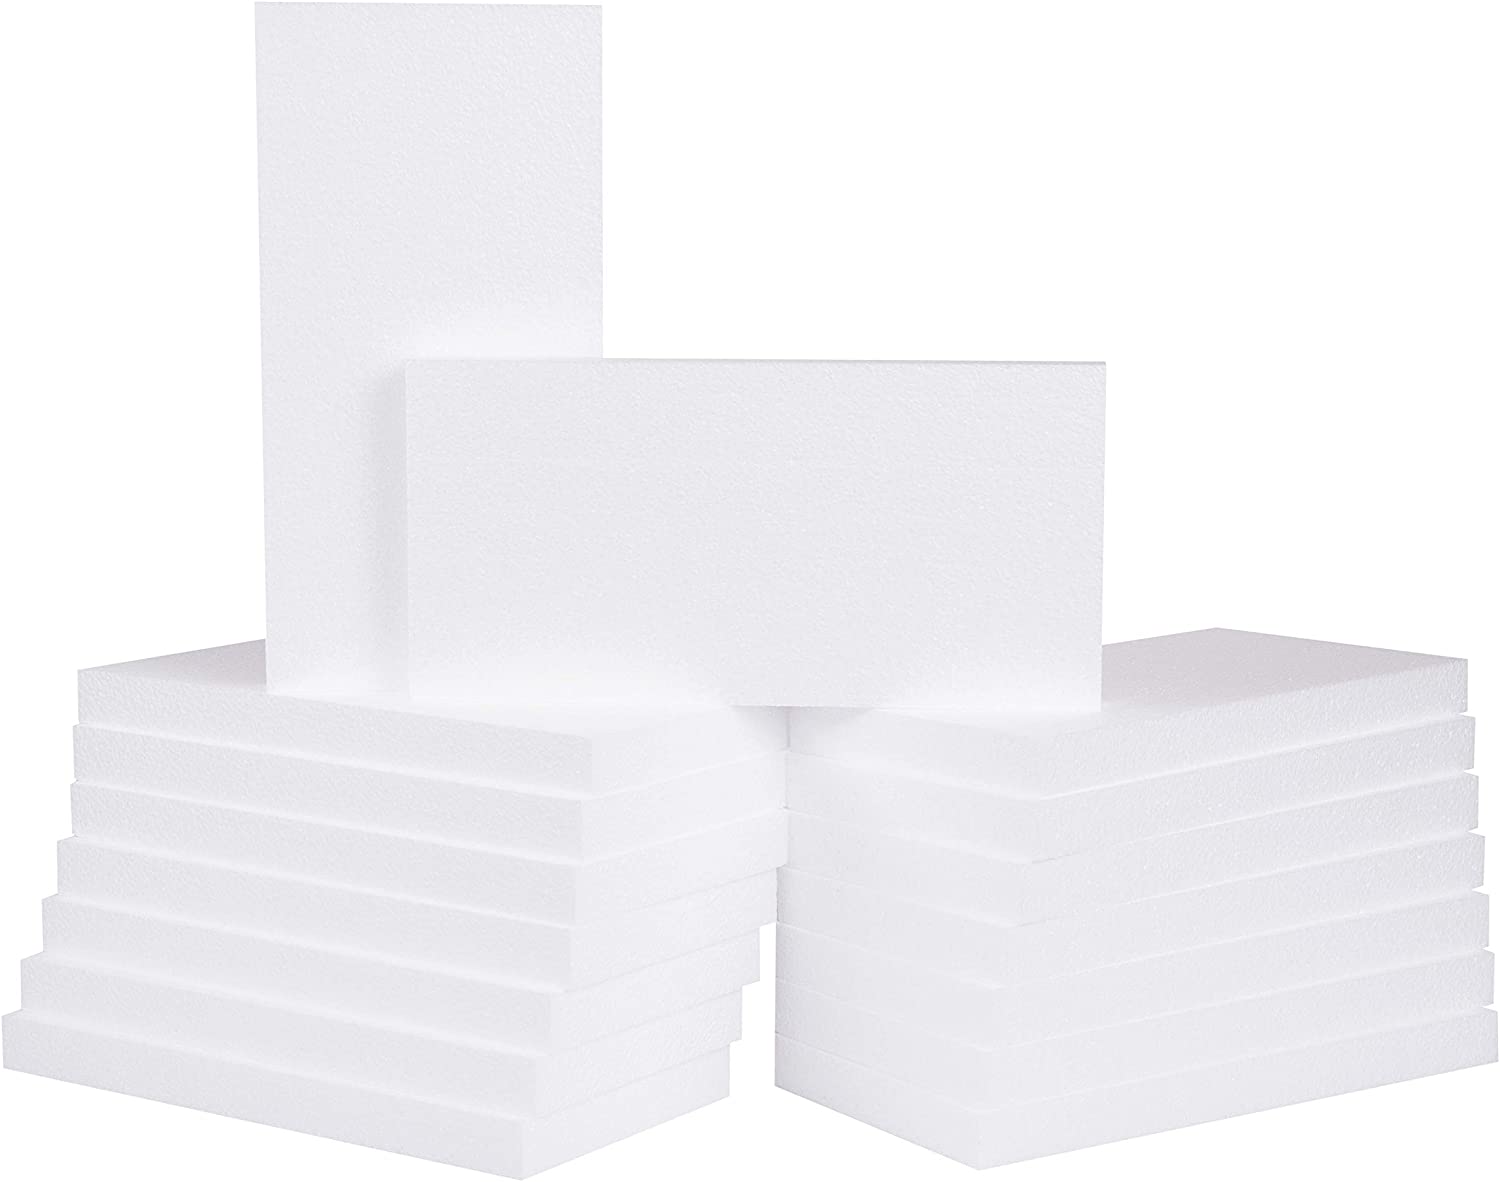 White EVA Foam Sheets Roll, for Cosplay, Costumes, Crafts, DIY Projects  (6mm, 39.5 x 13.8 in)